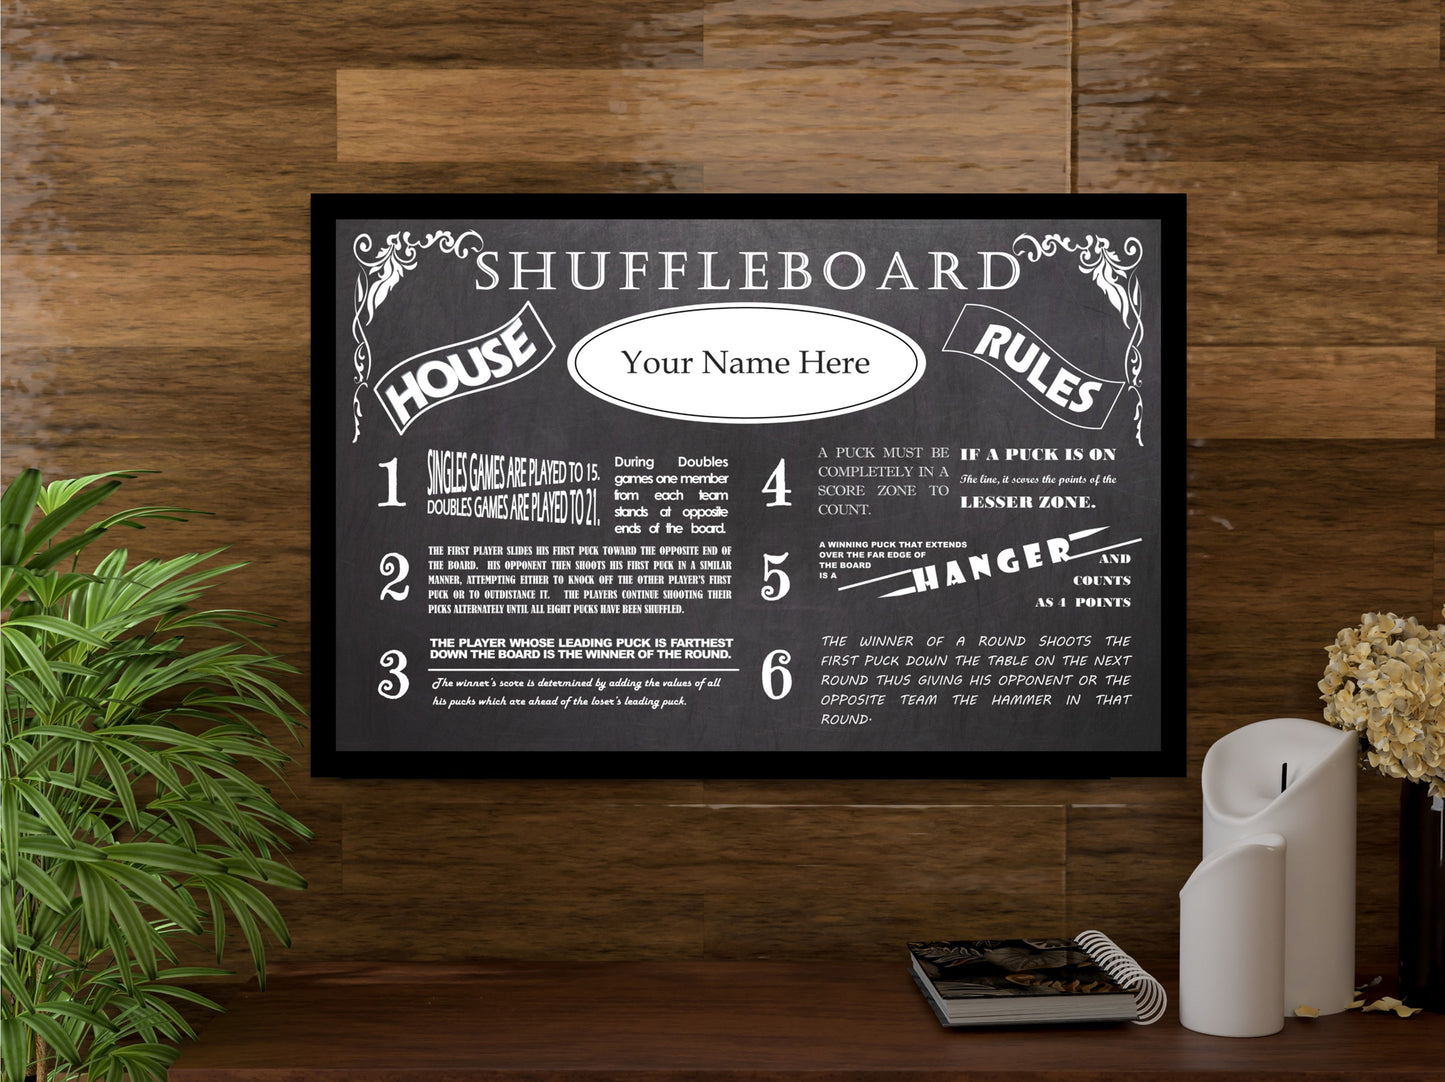 Personalized Vintage Chalkboard Looking Table Shuffleboard House Rules Poster - Personalized With Your Name!